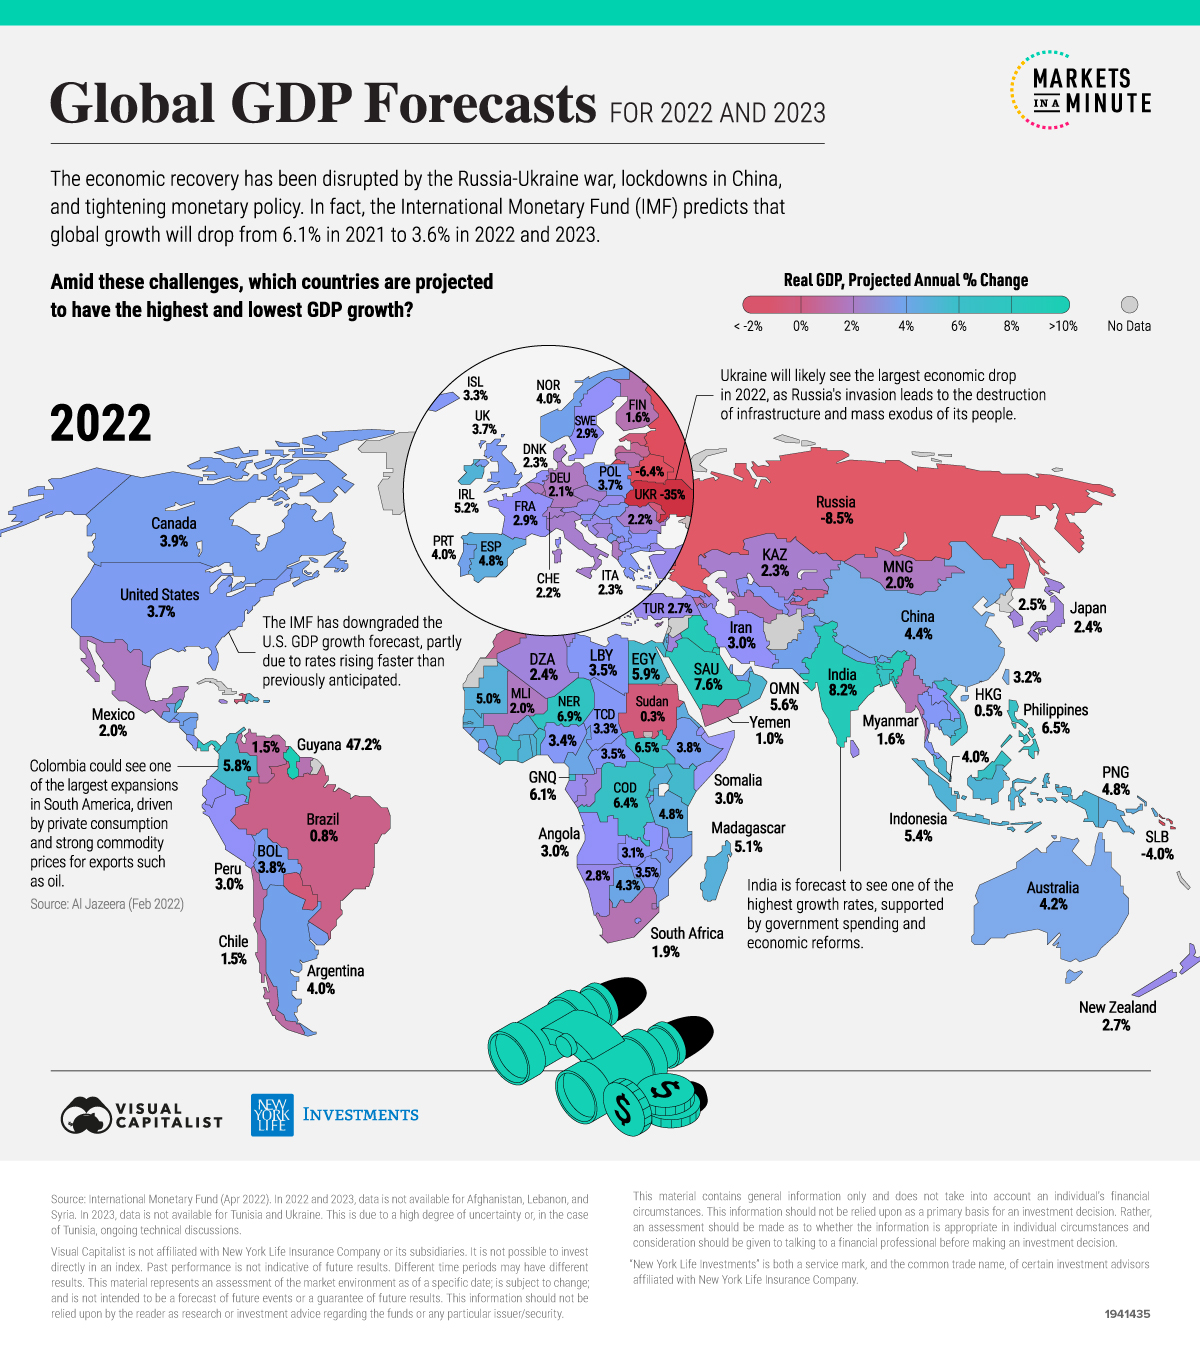 World map shaded according to GDP growth by country in 2022